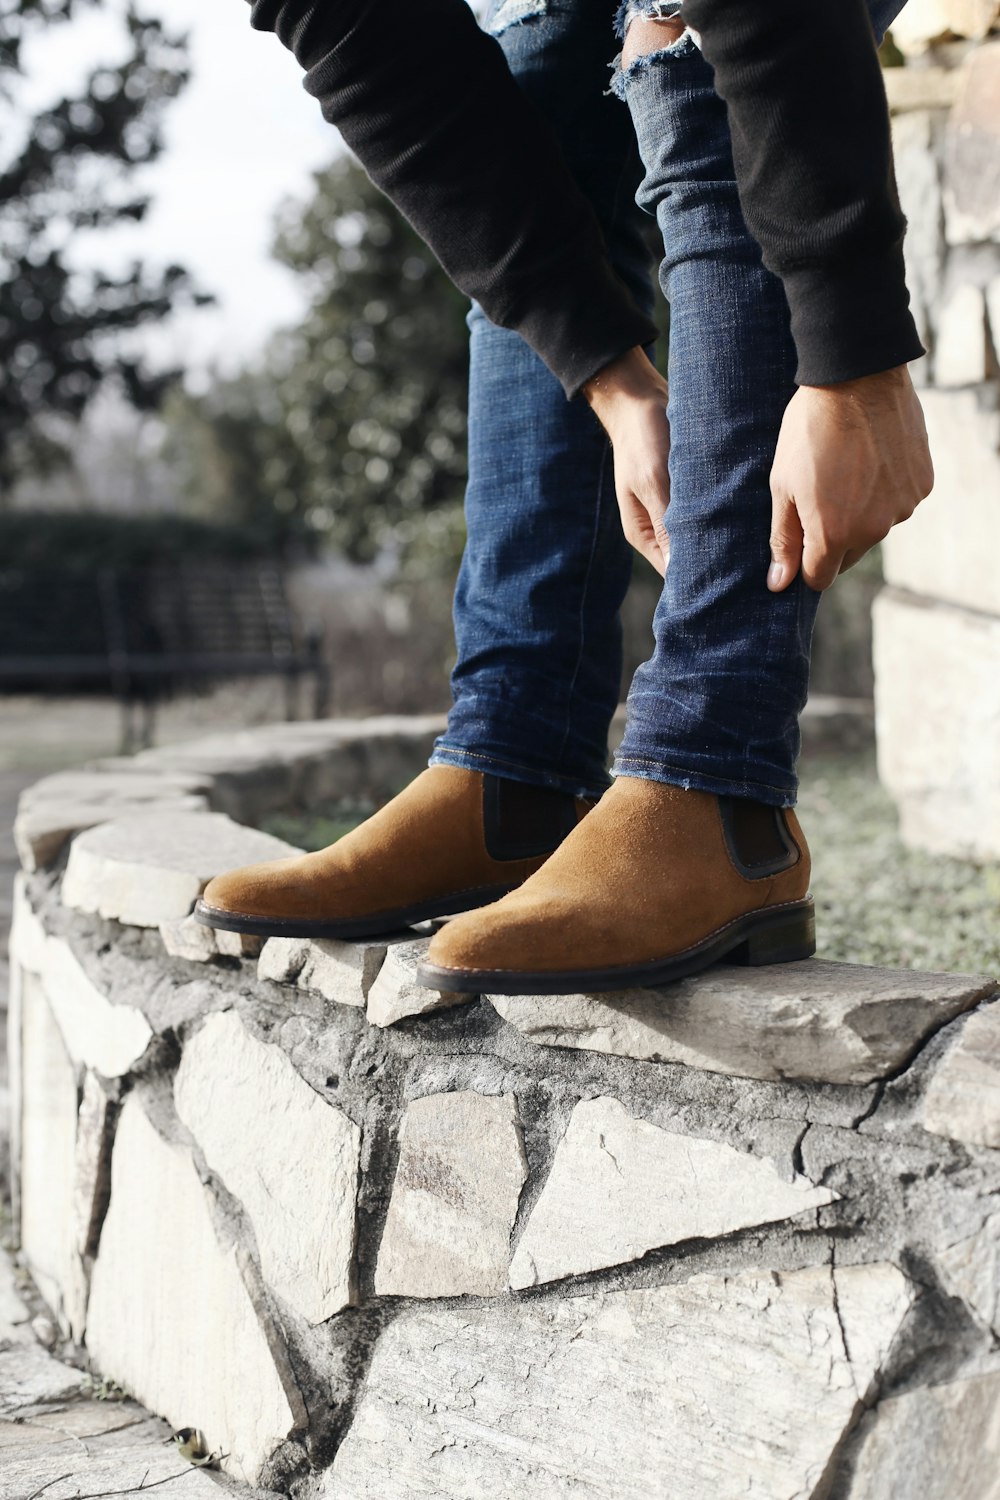 person wearing blue denim jeans and brown suede Chelsea boots standing  photo – Free Apparel Image on Unsplash